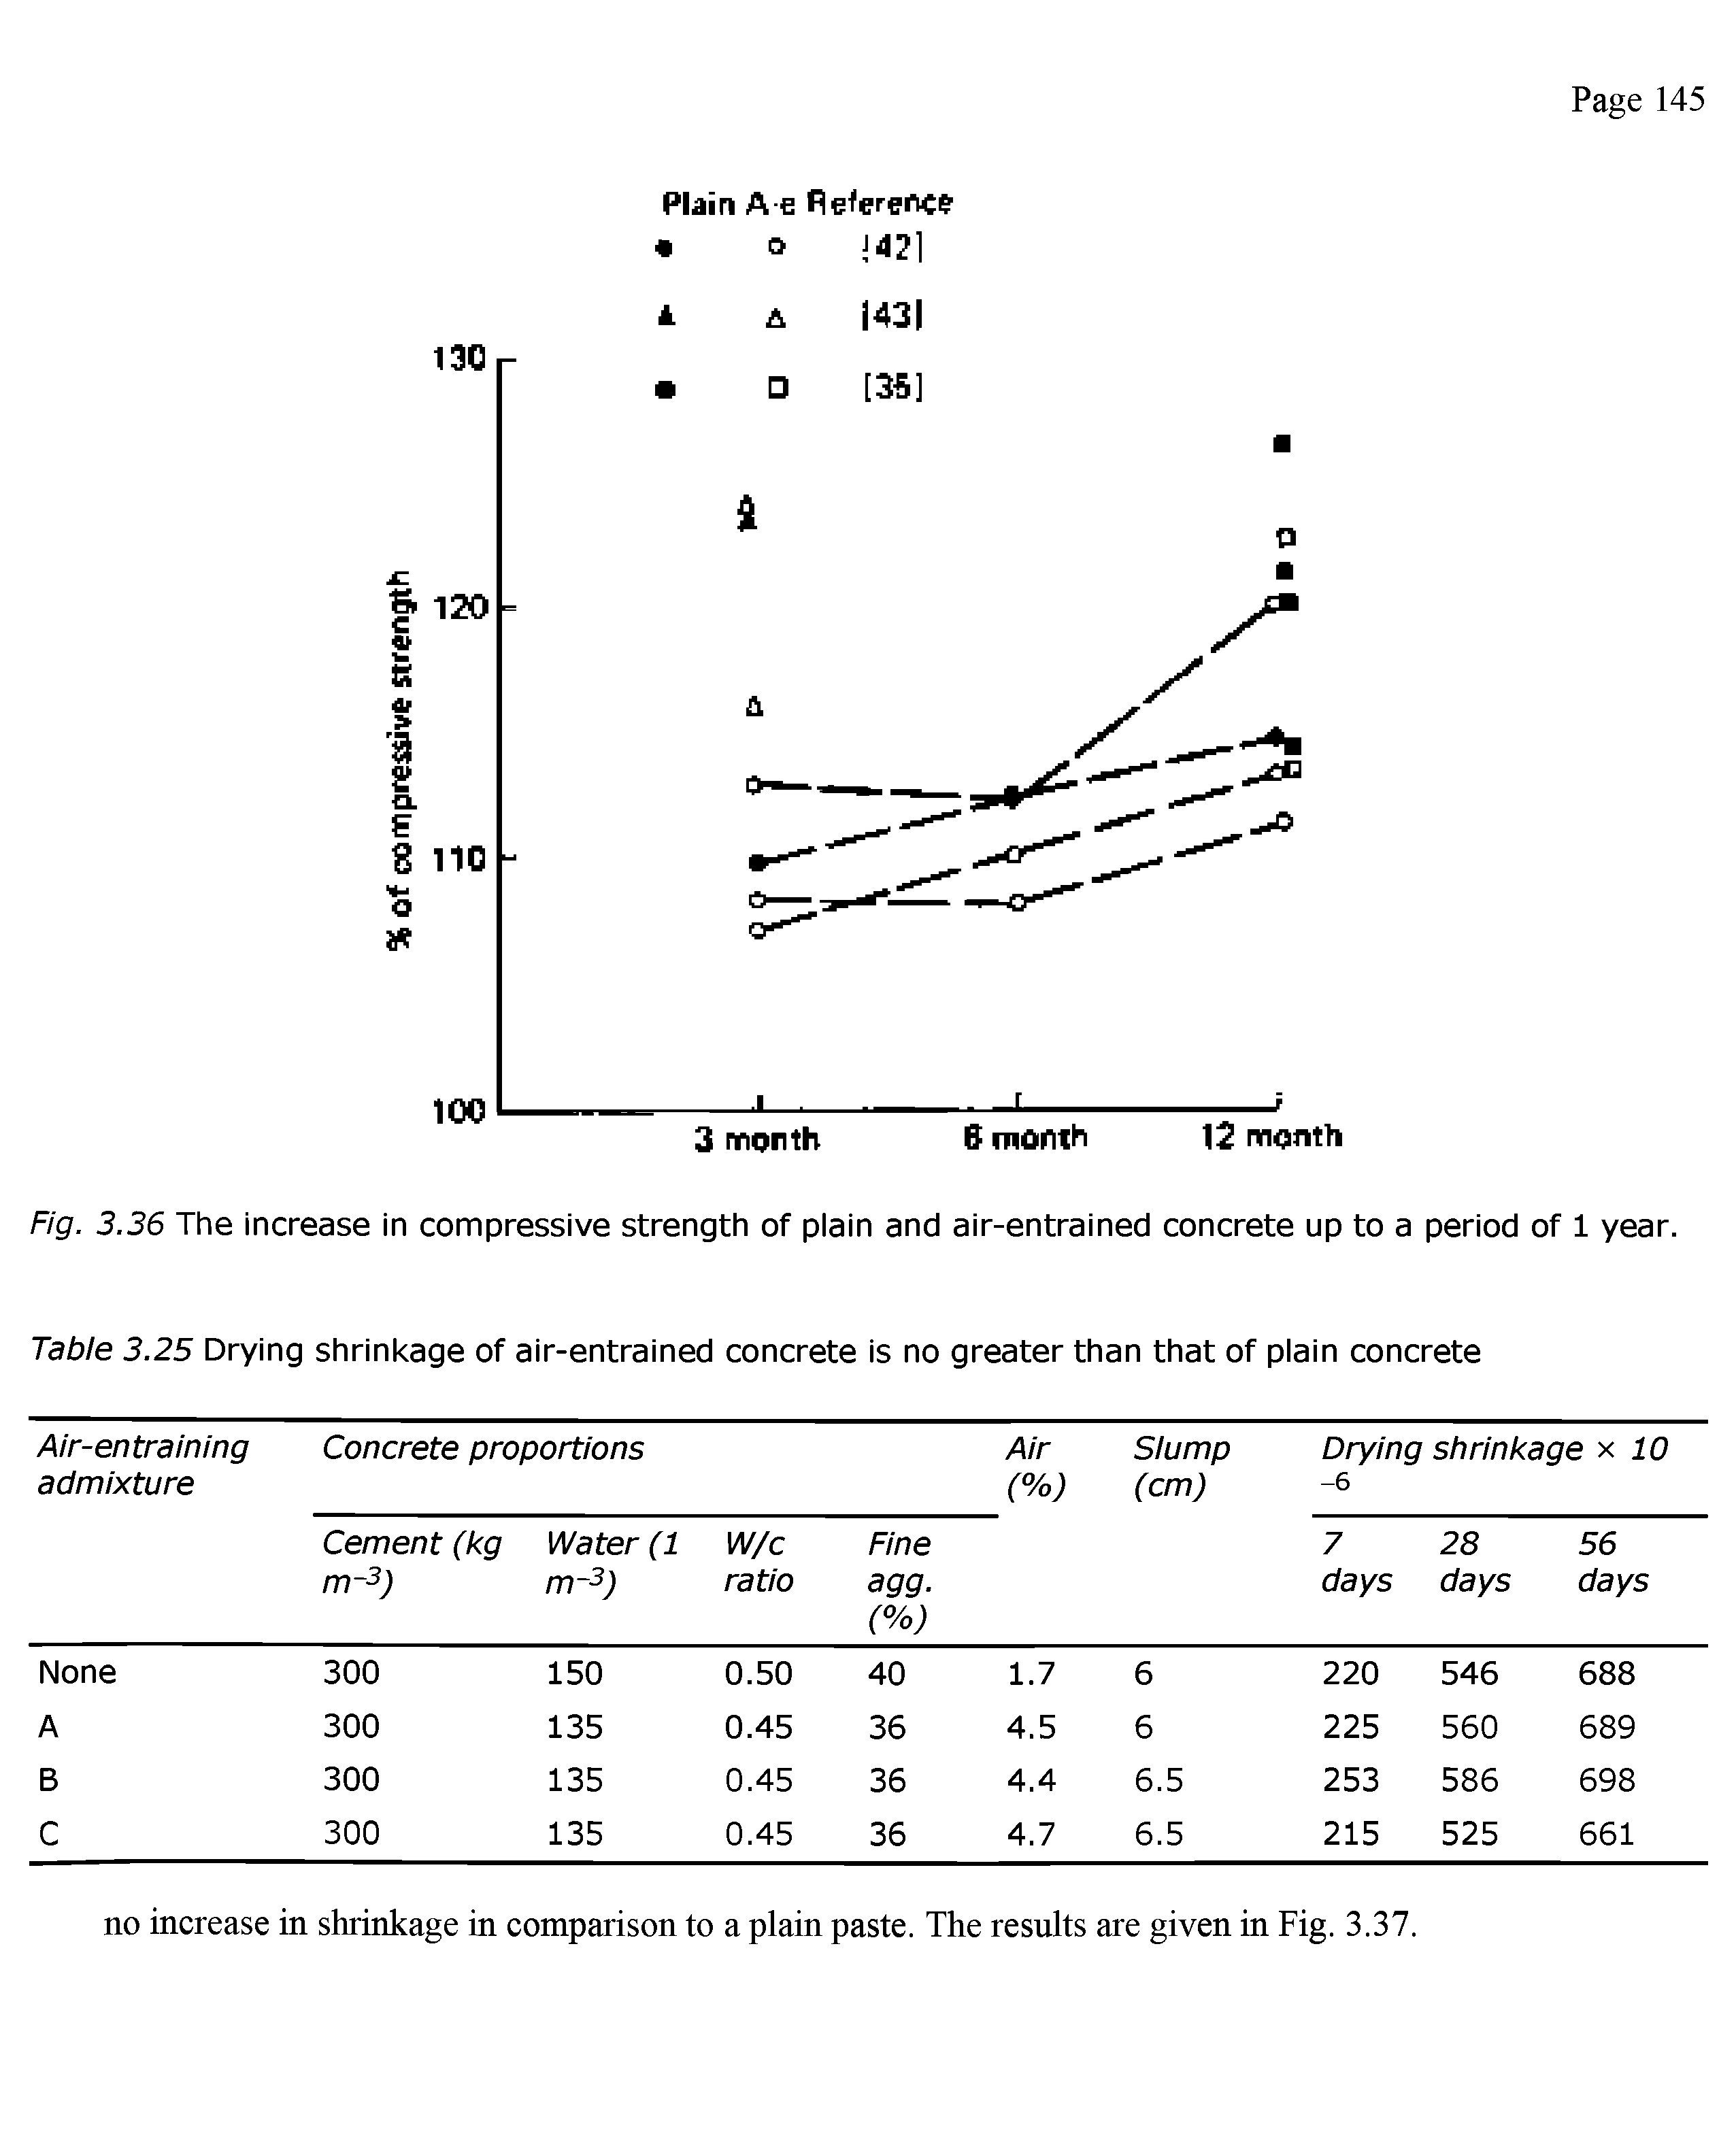 Fig. 3.36 The increase in compressive strength of plain and air-entrained concrete up to a period of 1 year. Table 3.25 Drying shrinkage of air-entrained concrete is no greater than that of plain concrete...